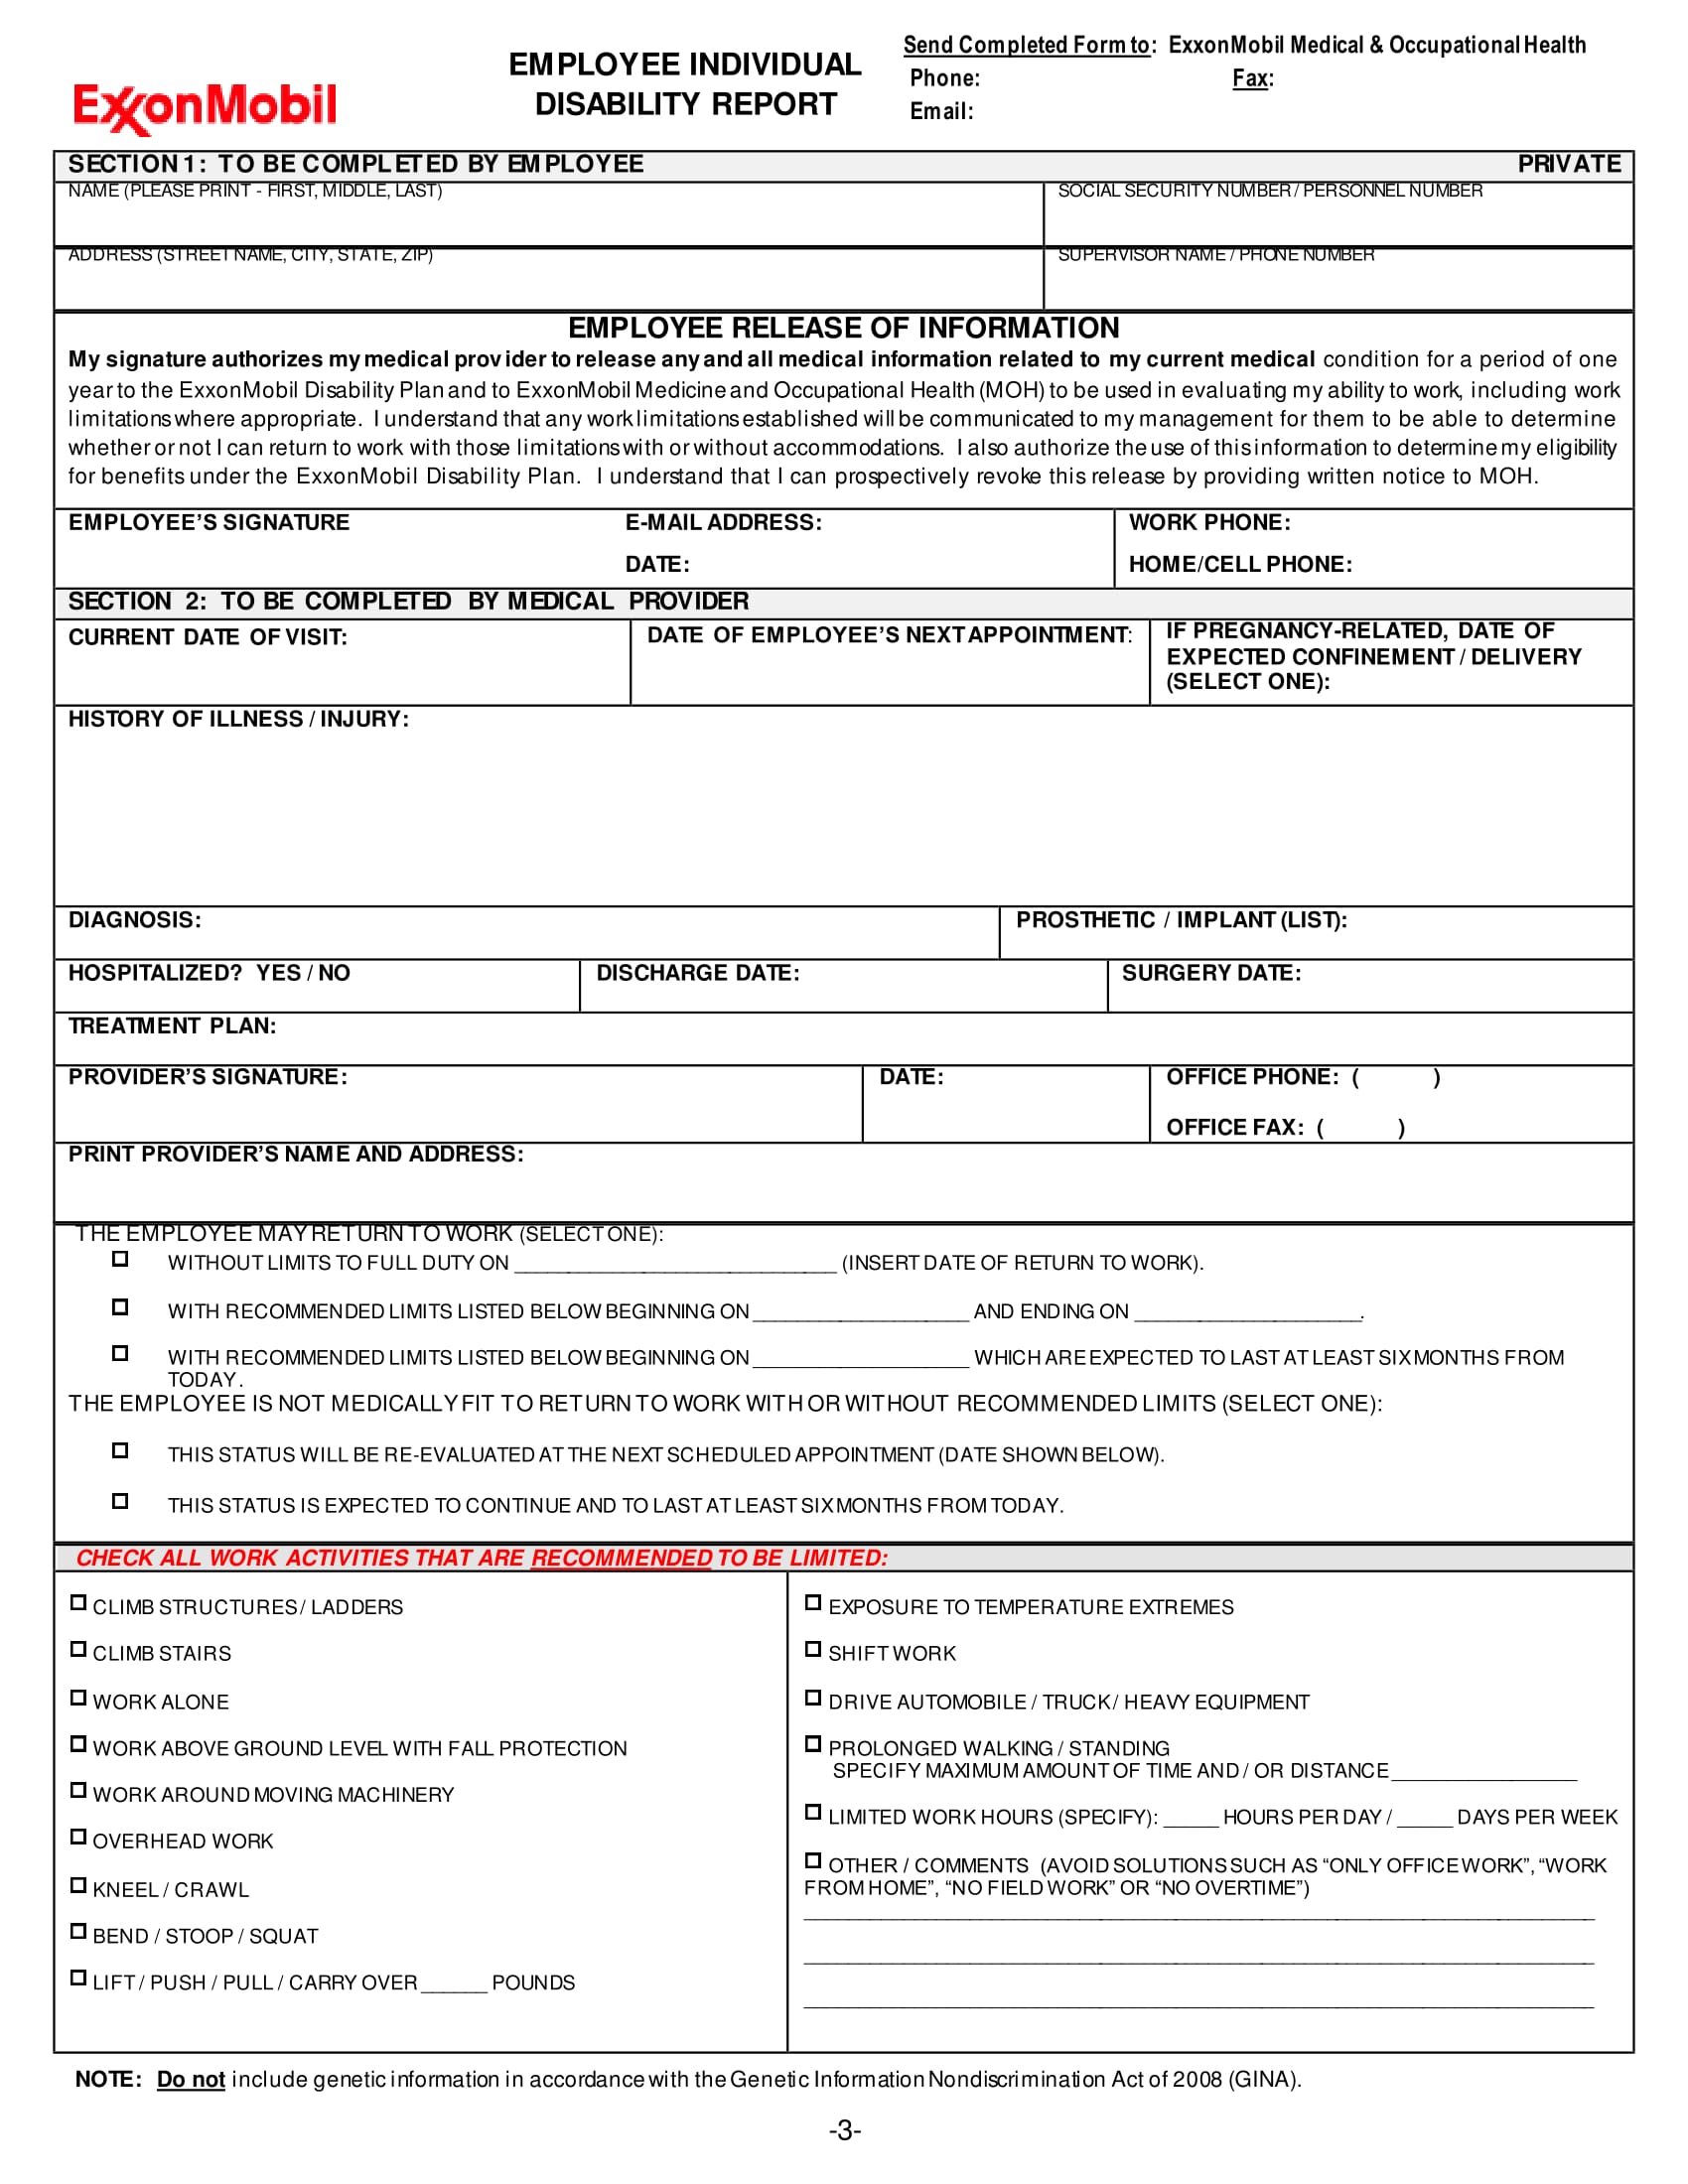 employee individual disability report form 3